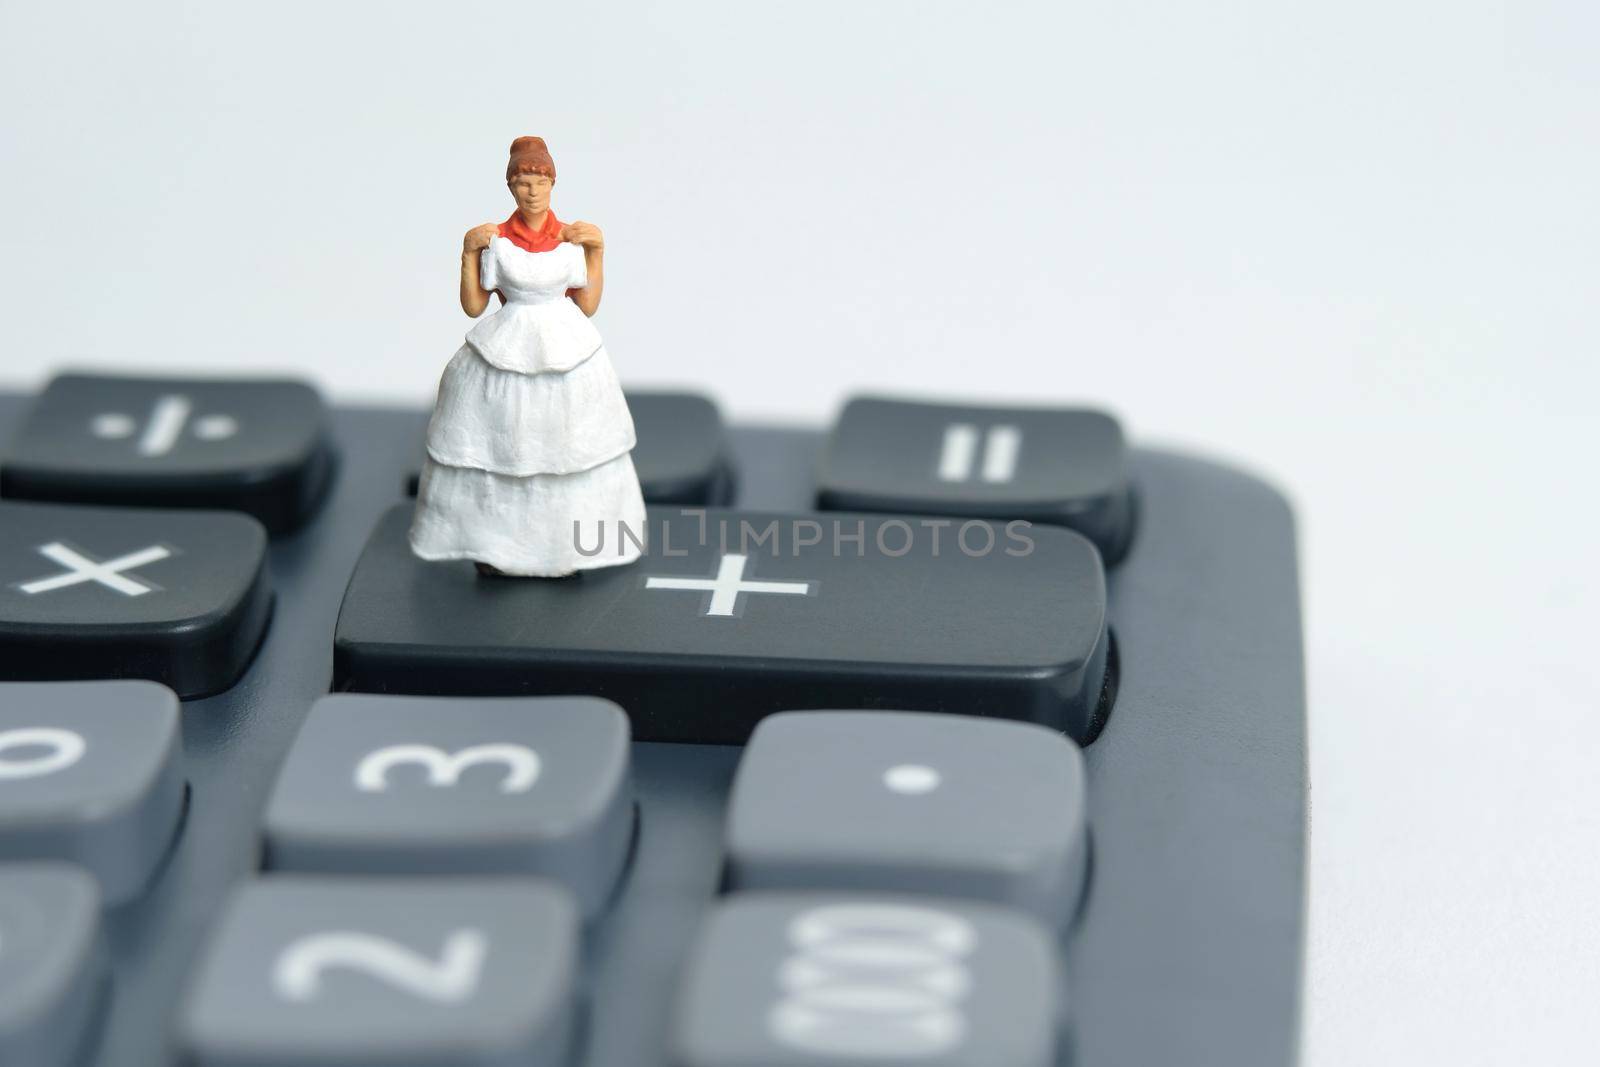 Wedding dress budget for bride, miniature people illustration concept. Woman standing above calculator. Image photo by Macrostud